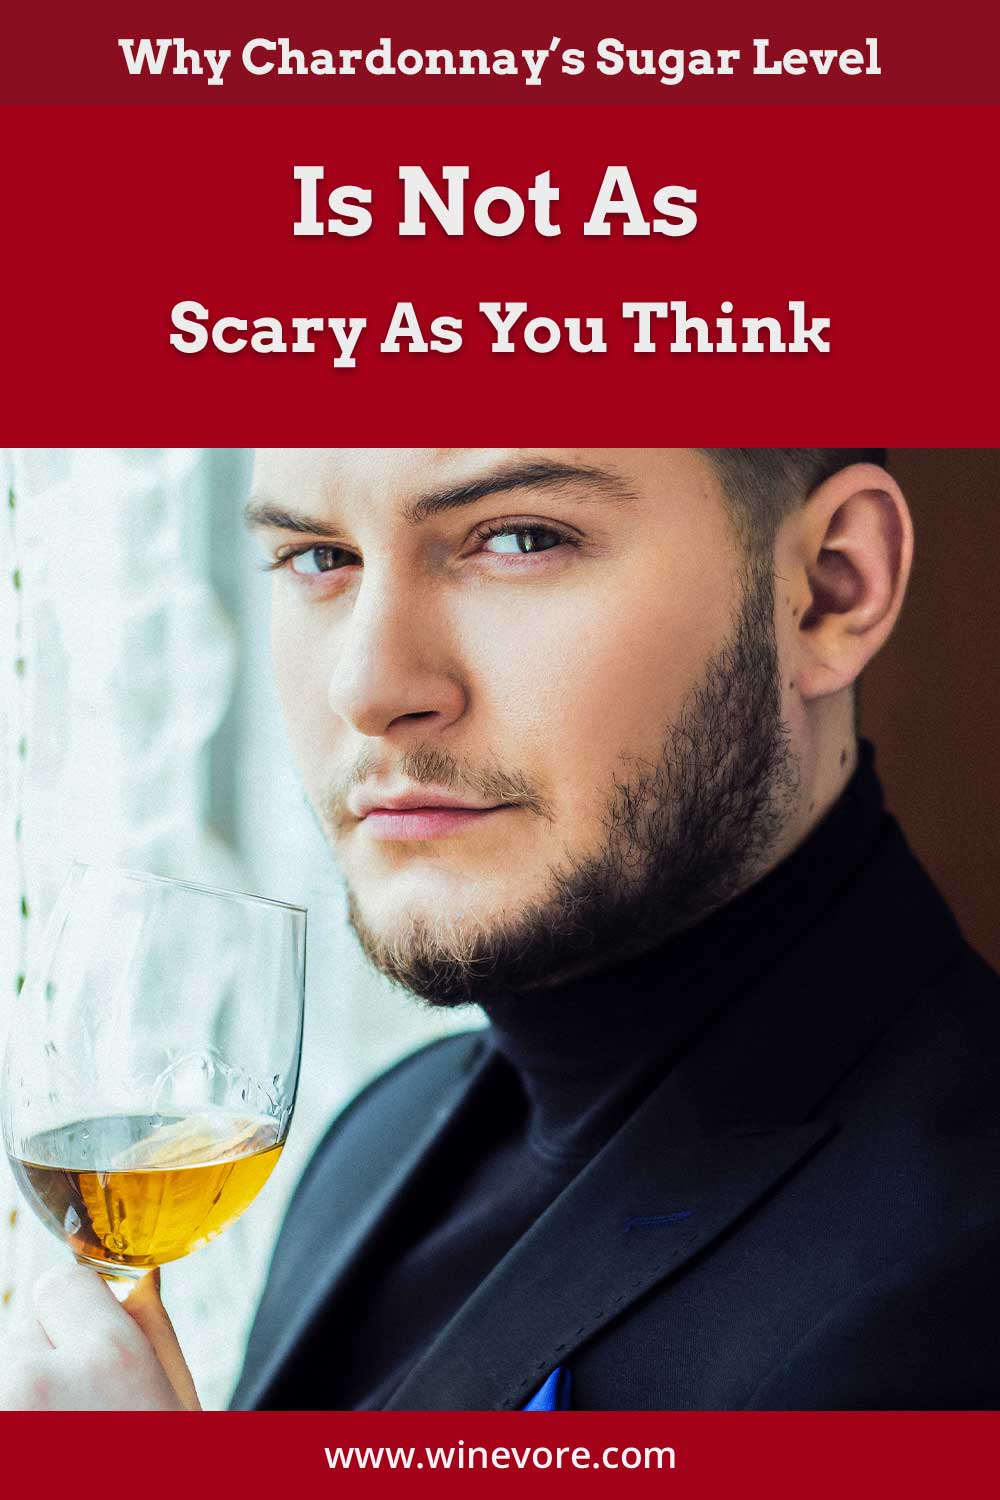 Man in a suit with wine glass in hand - Why Chardonnay's Sugar Level Is Not As Scary As You Think?